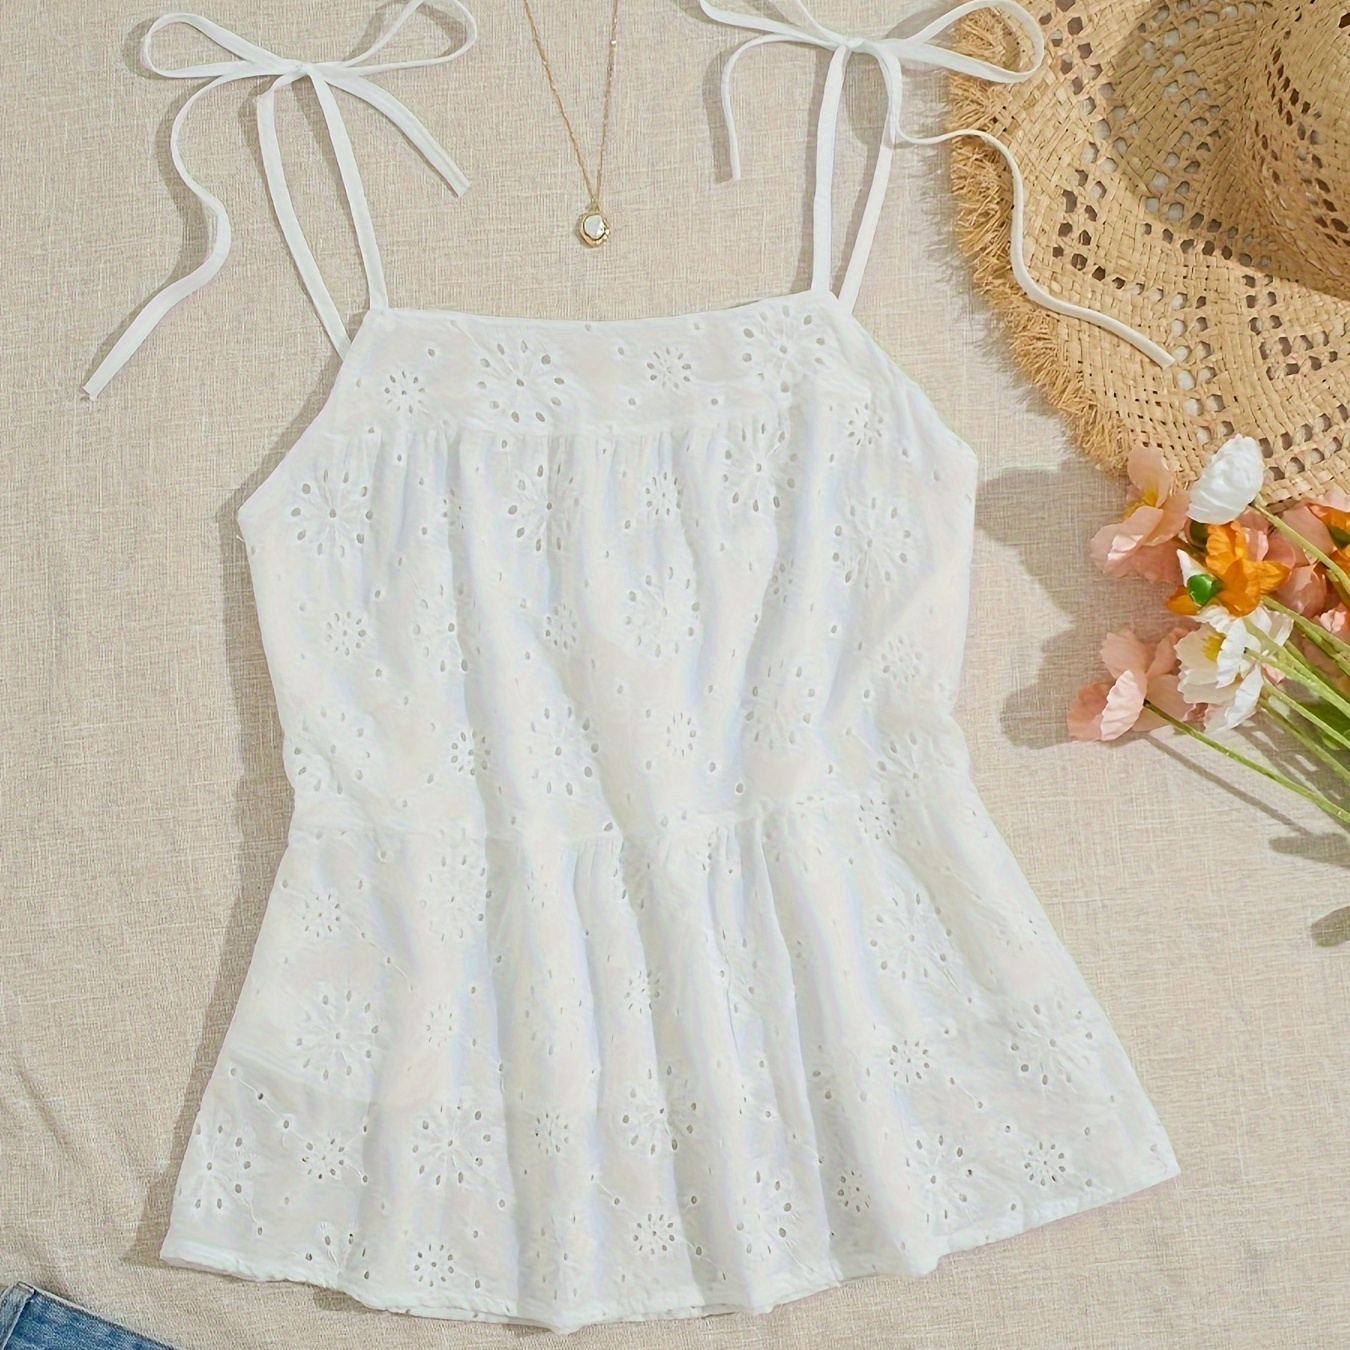 

Solid Color Spaghetti Strap Top, Vacation Lace Up Eyelet Embroidery Sleeveless Cami Top For Summer, Women's Clothing